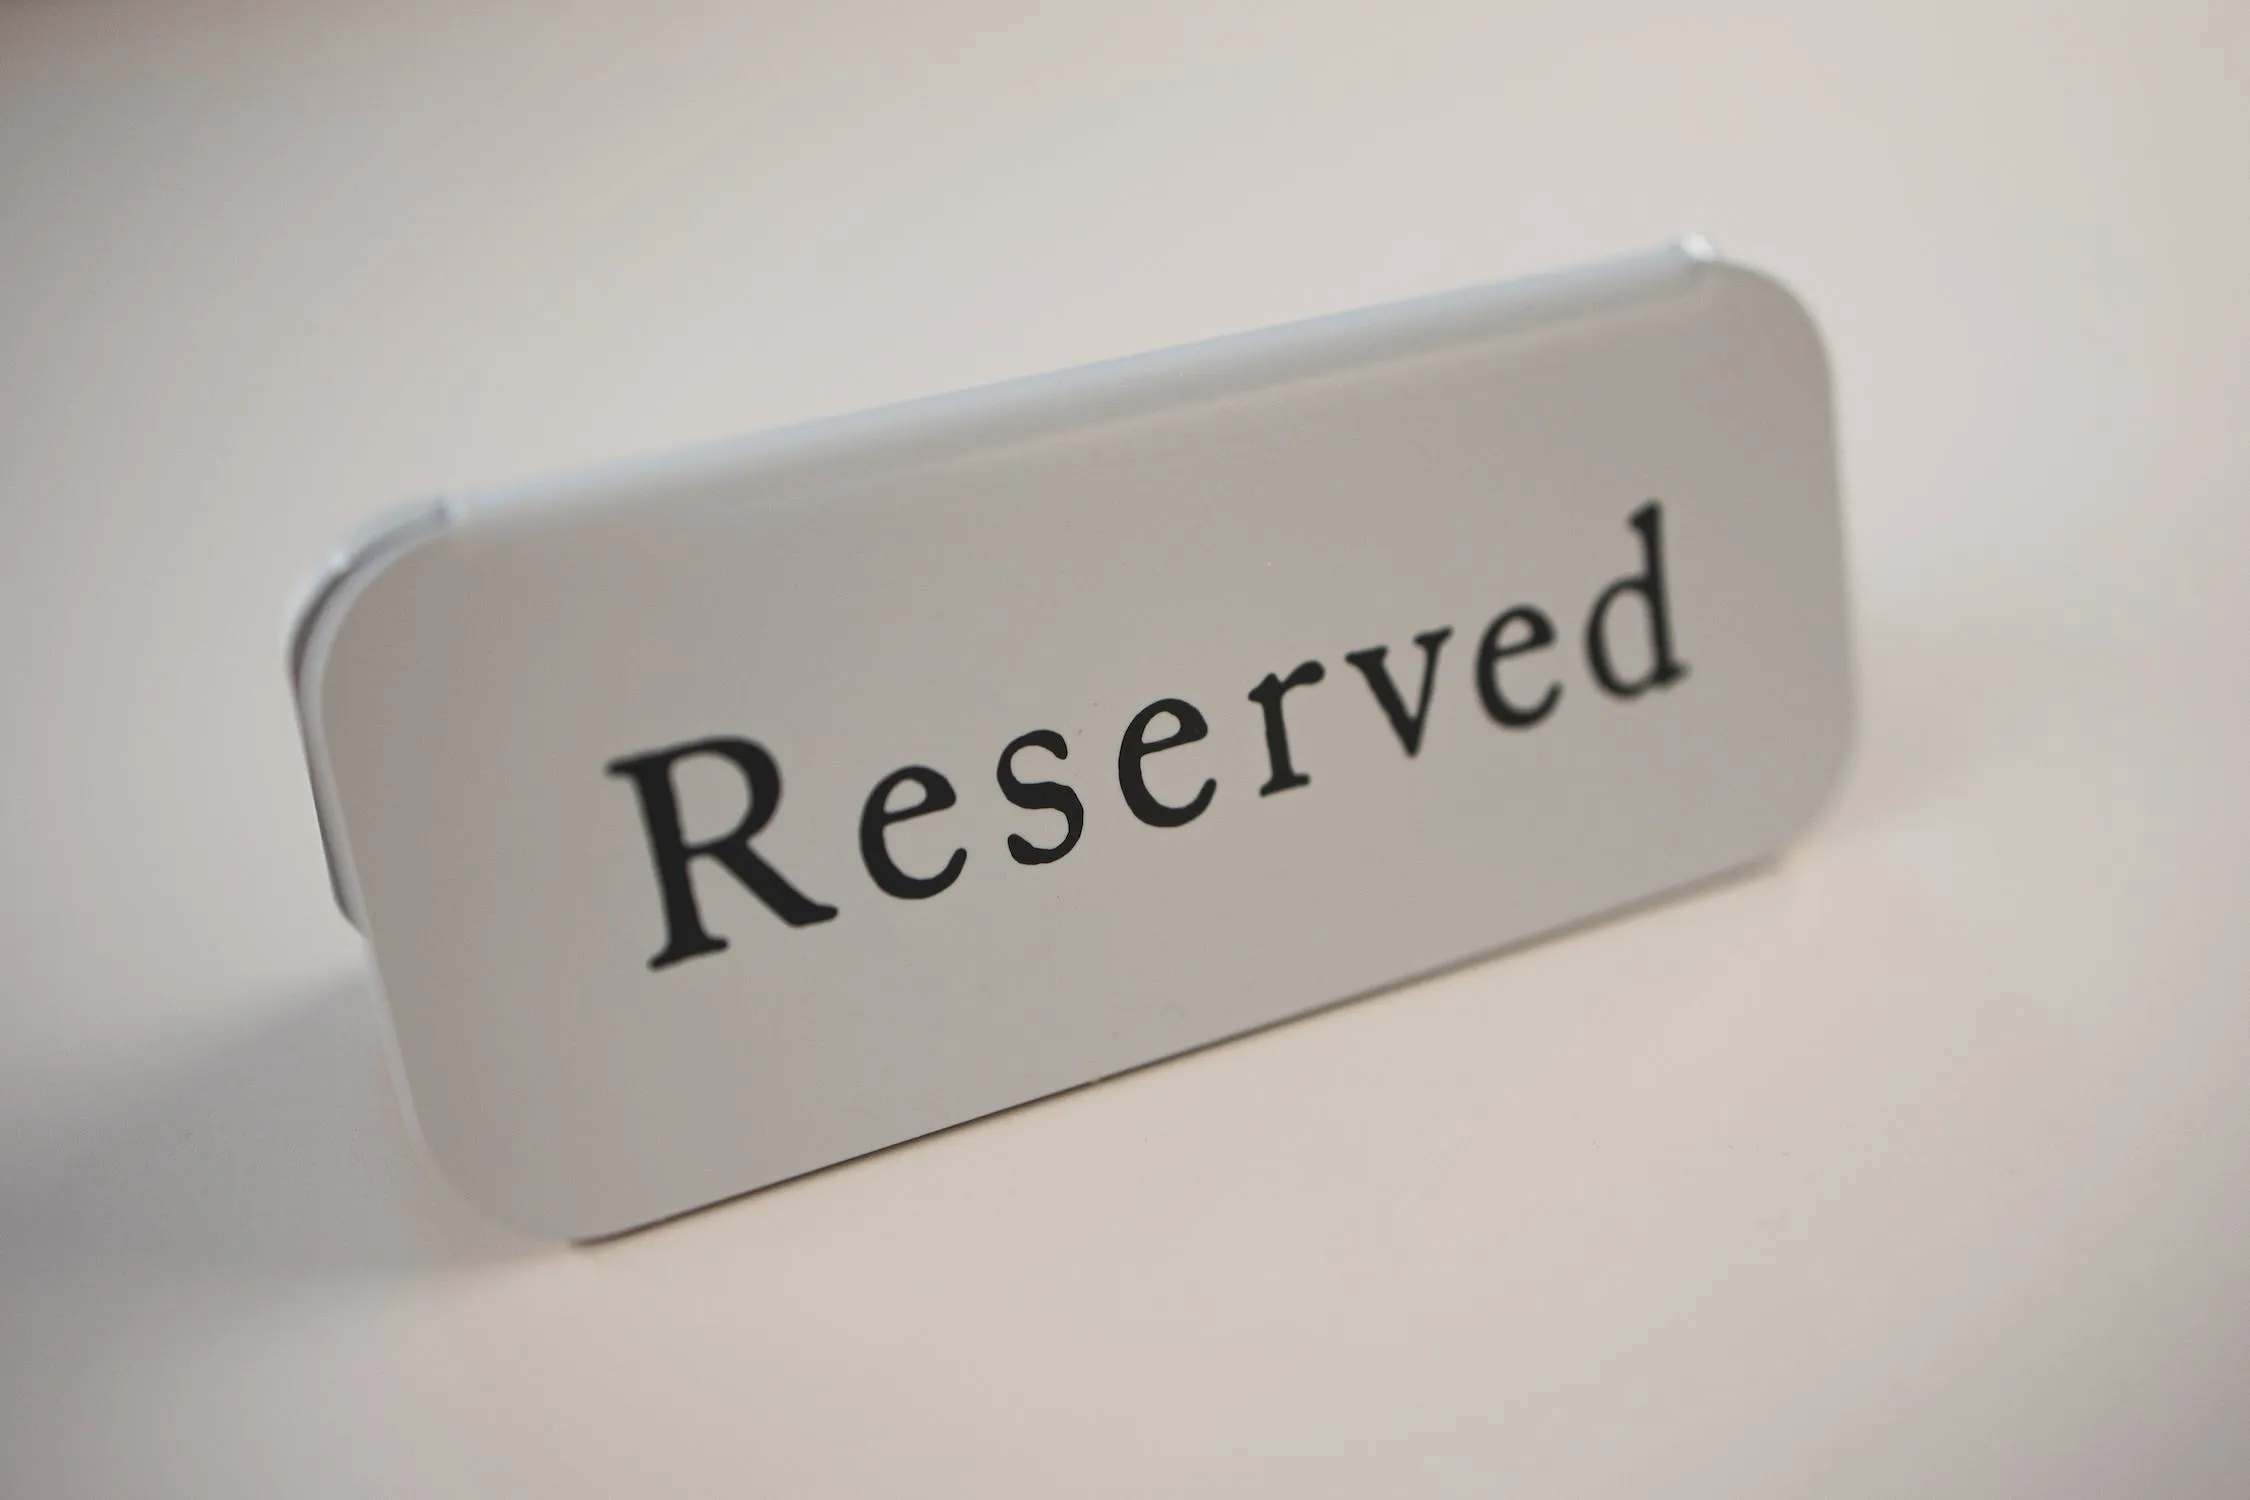 Reserved signage on a restaurant table